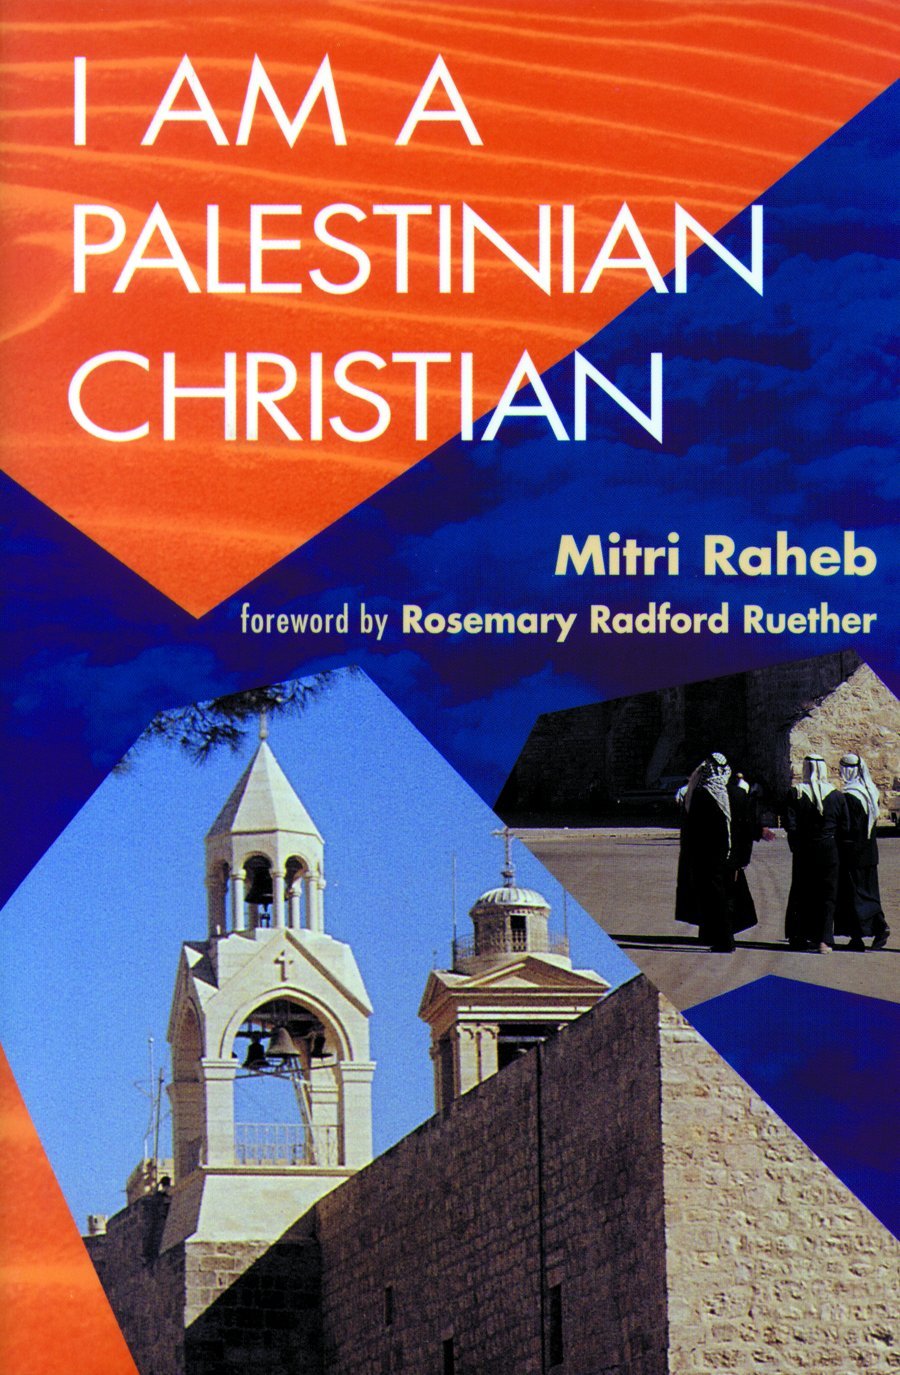 I Am a Palestinian Christian: God and Politics in the Holy Land: A Personal Testimony